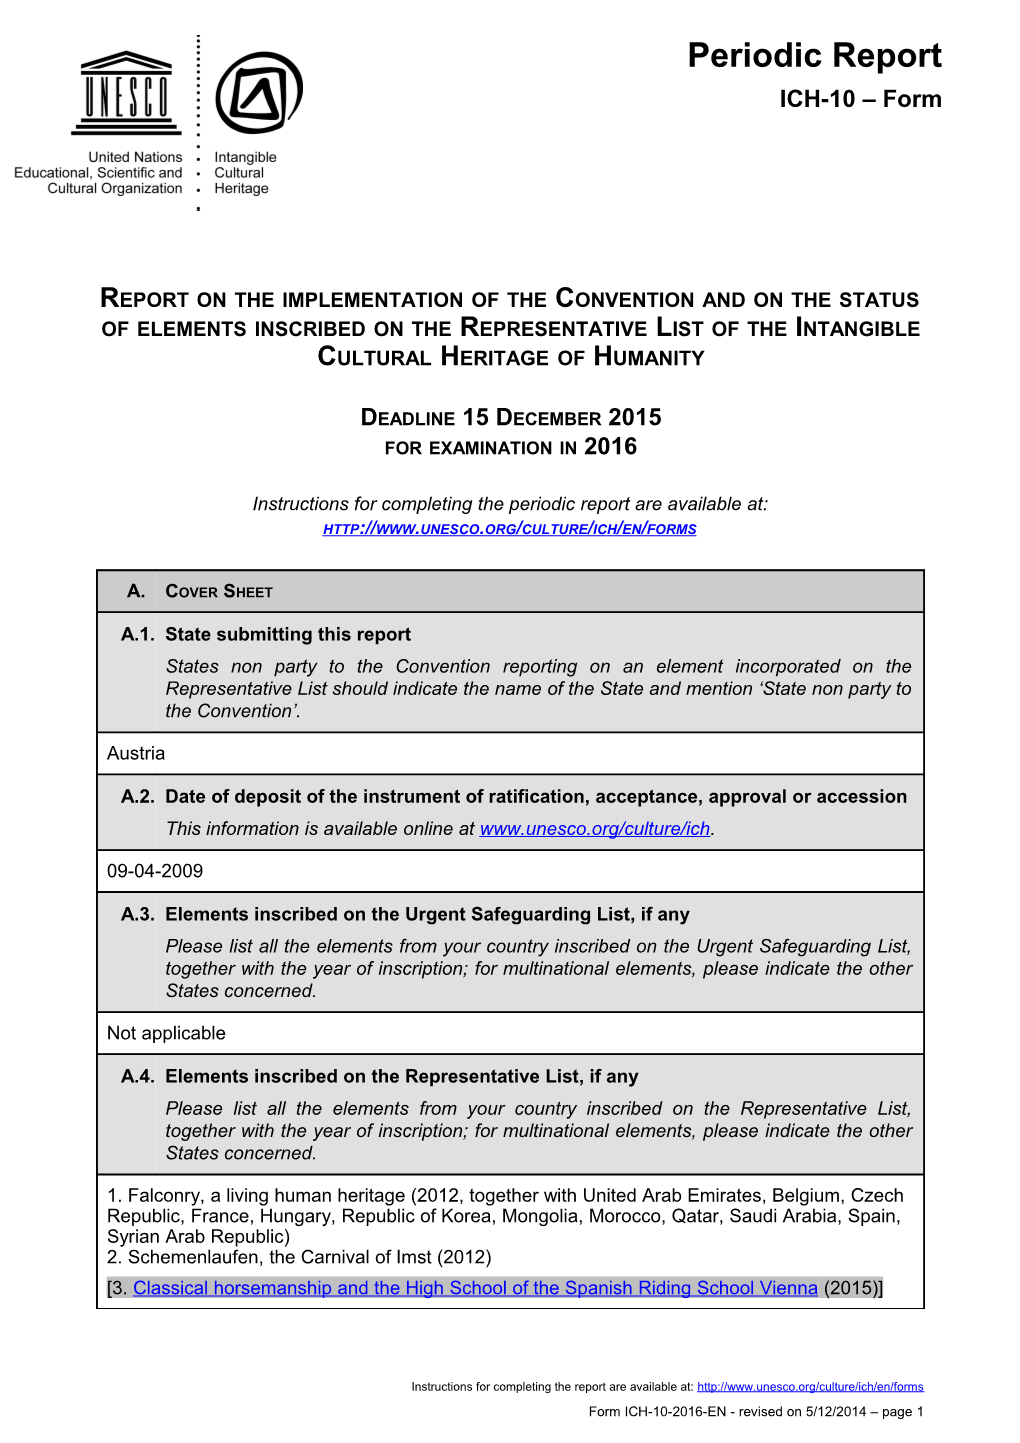 Report on the Implementation of the Convention and on the Status of Elements Inscribed